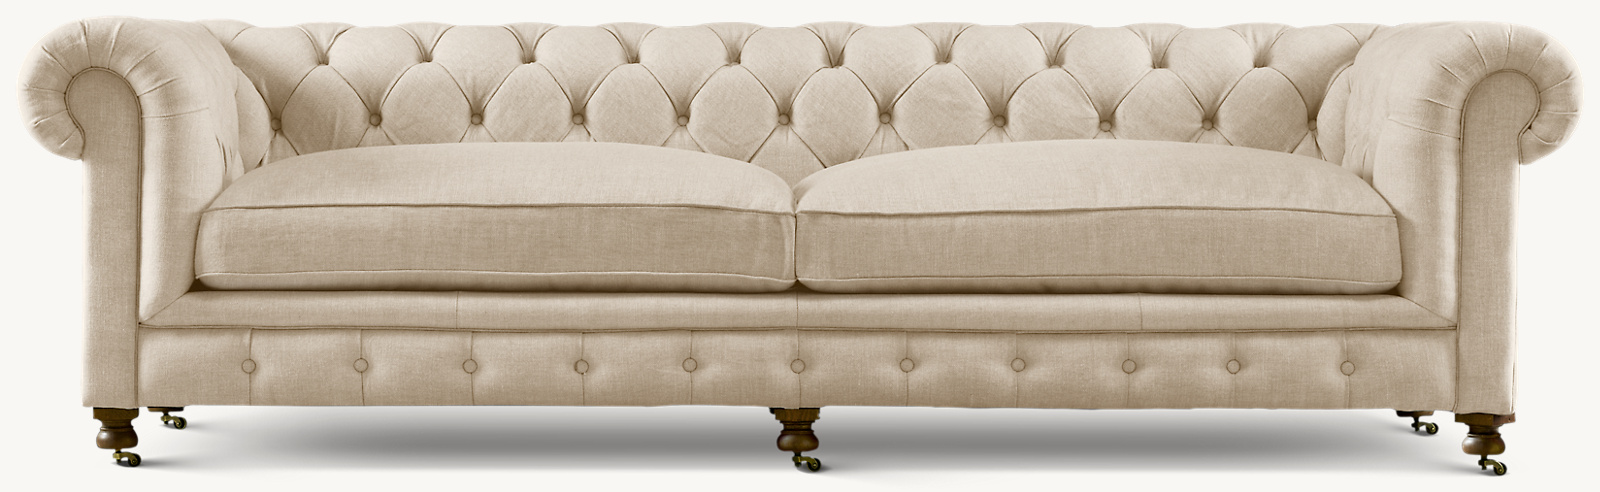 Shown in Sand Belgian Linen. Cushion configuration varies by frame size.